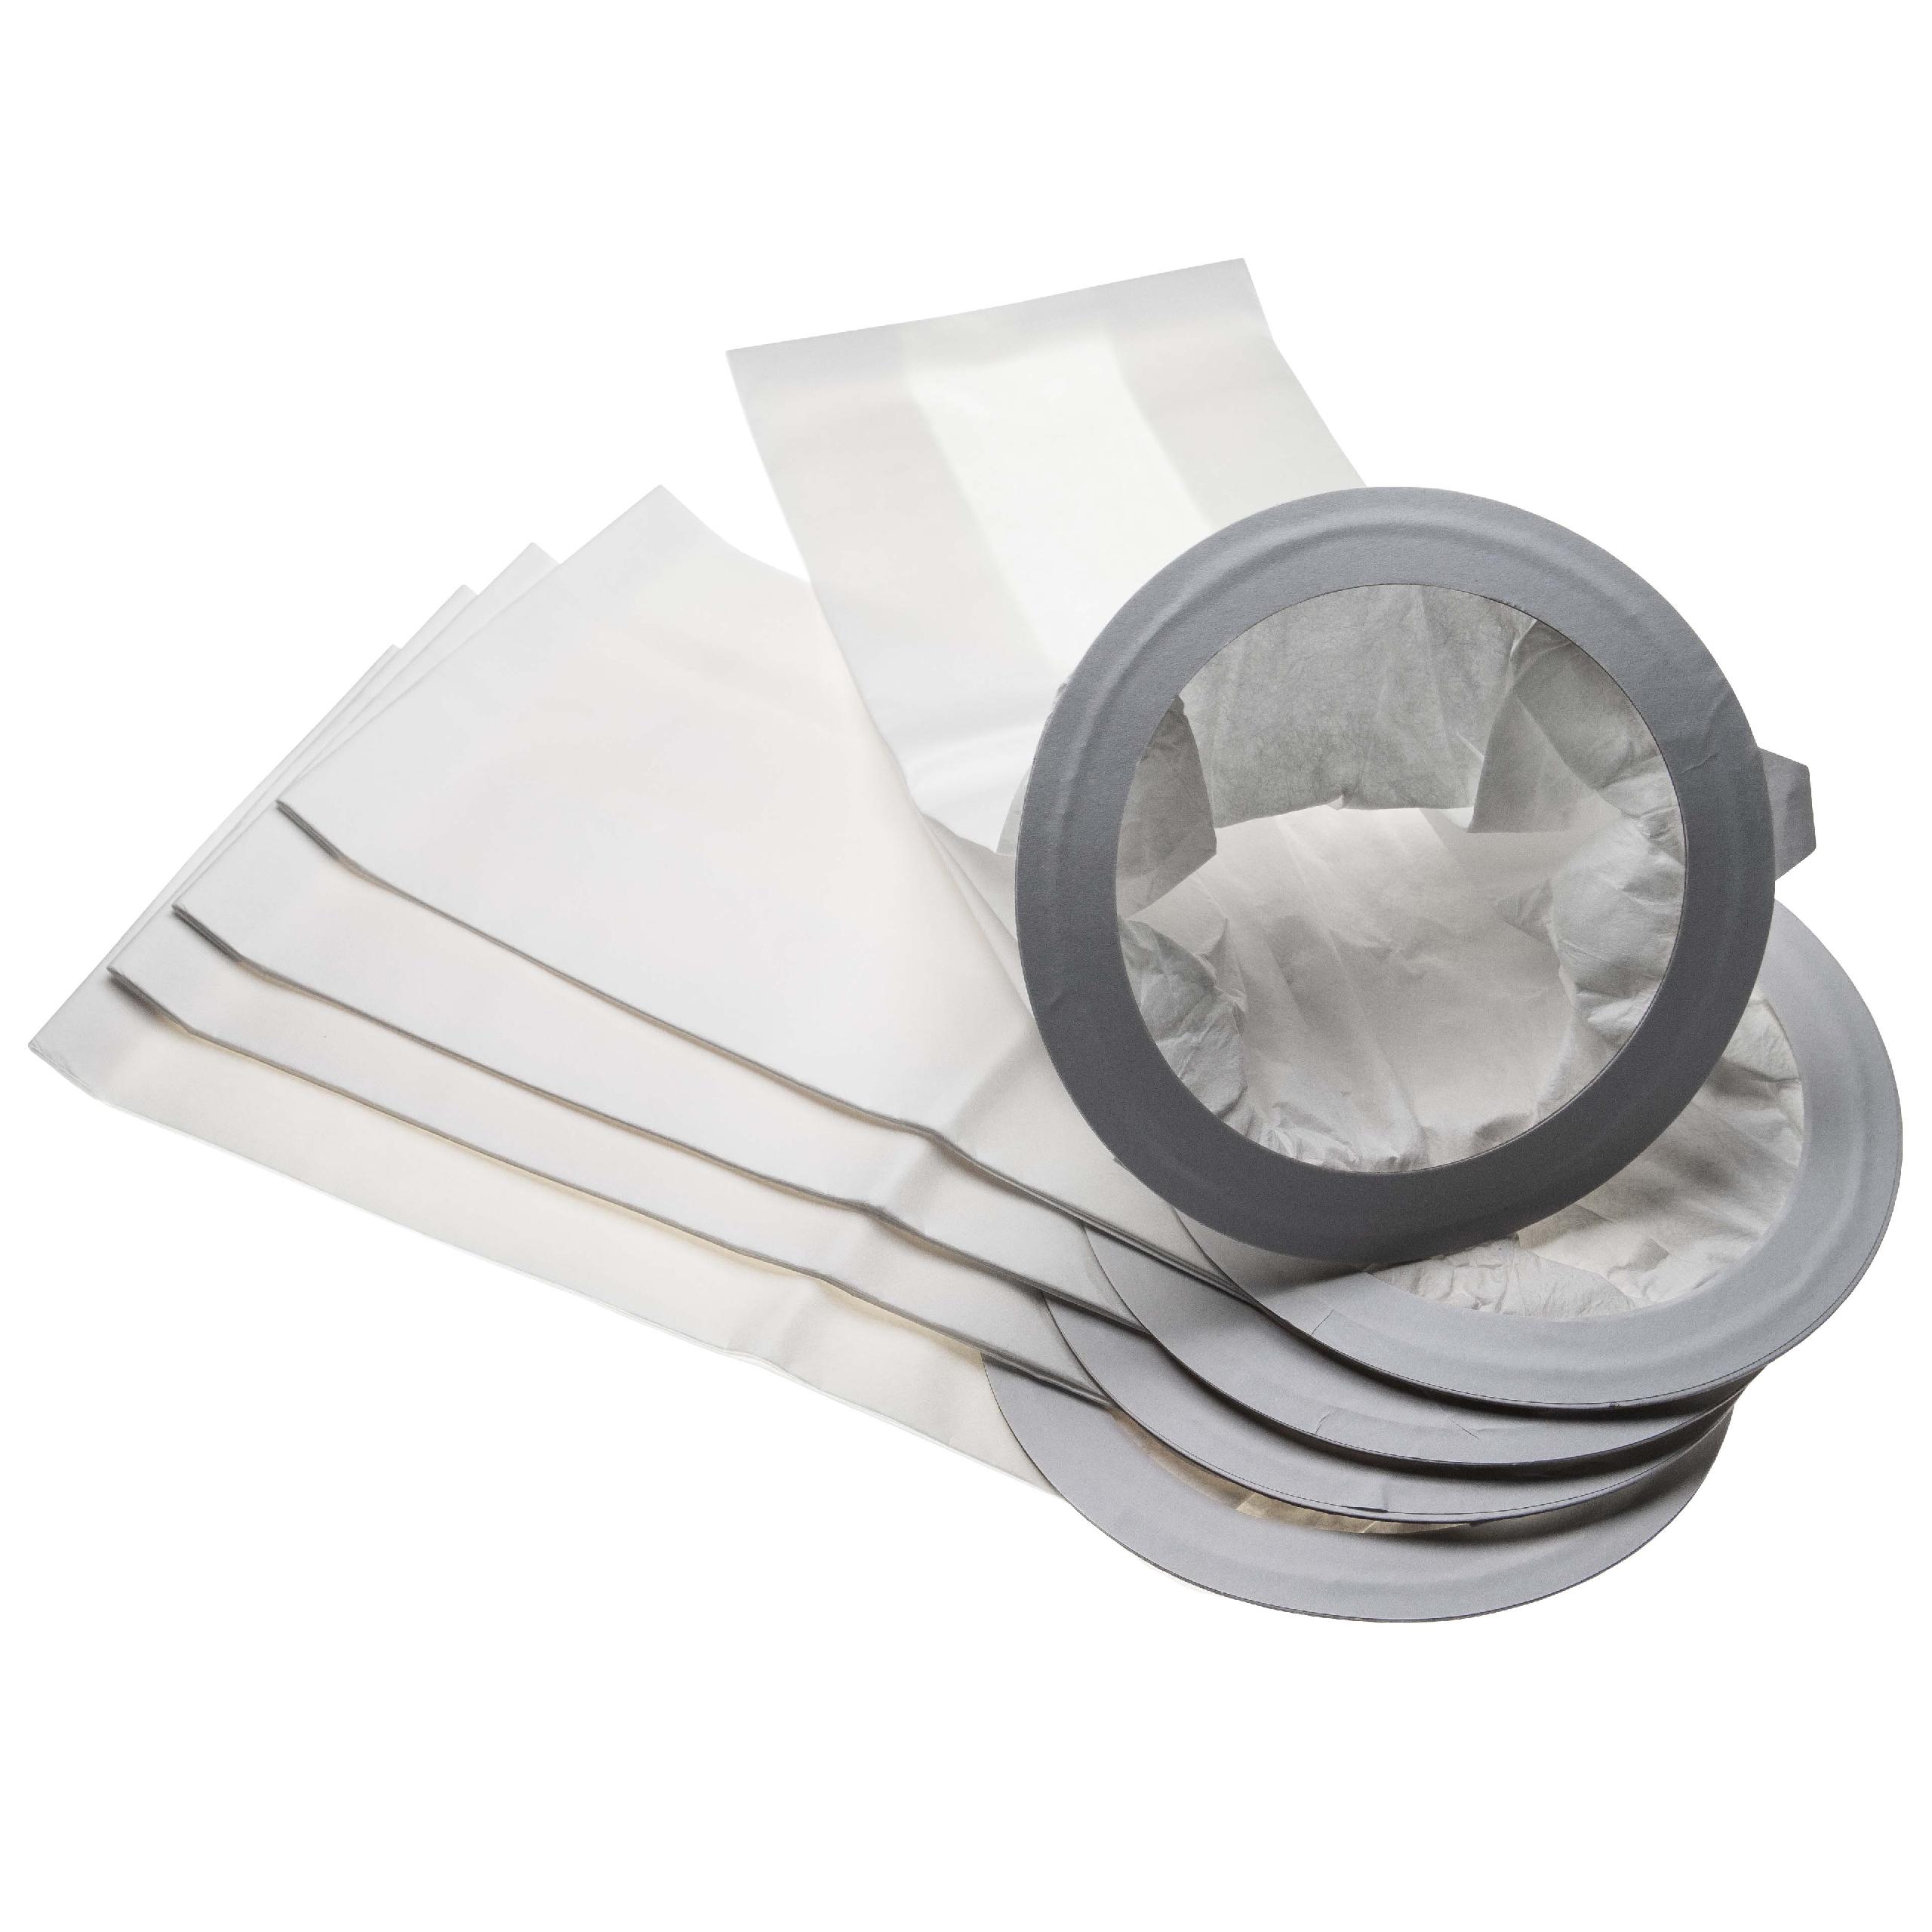 5x Vacuum Cleaner Bag replaces Nilfisk 1471097500 for Advance - paper